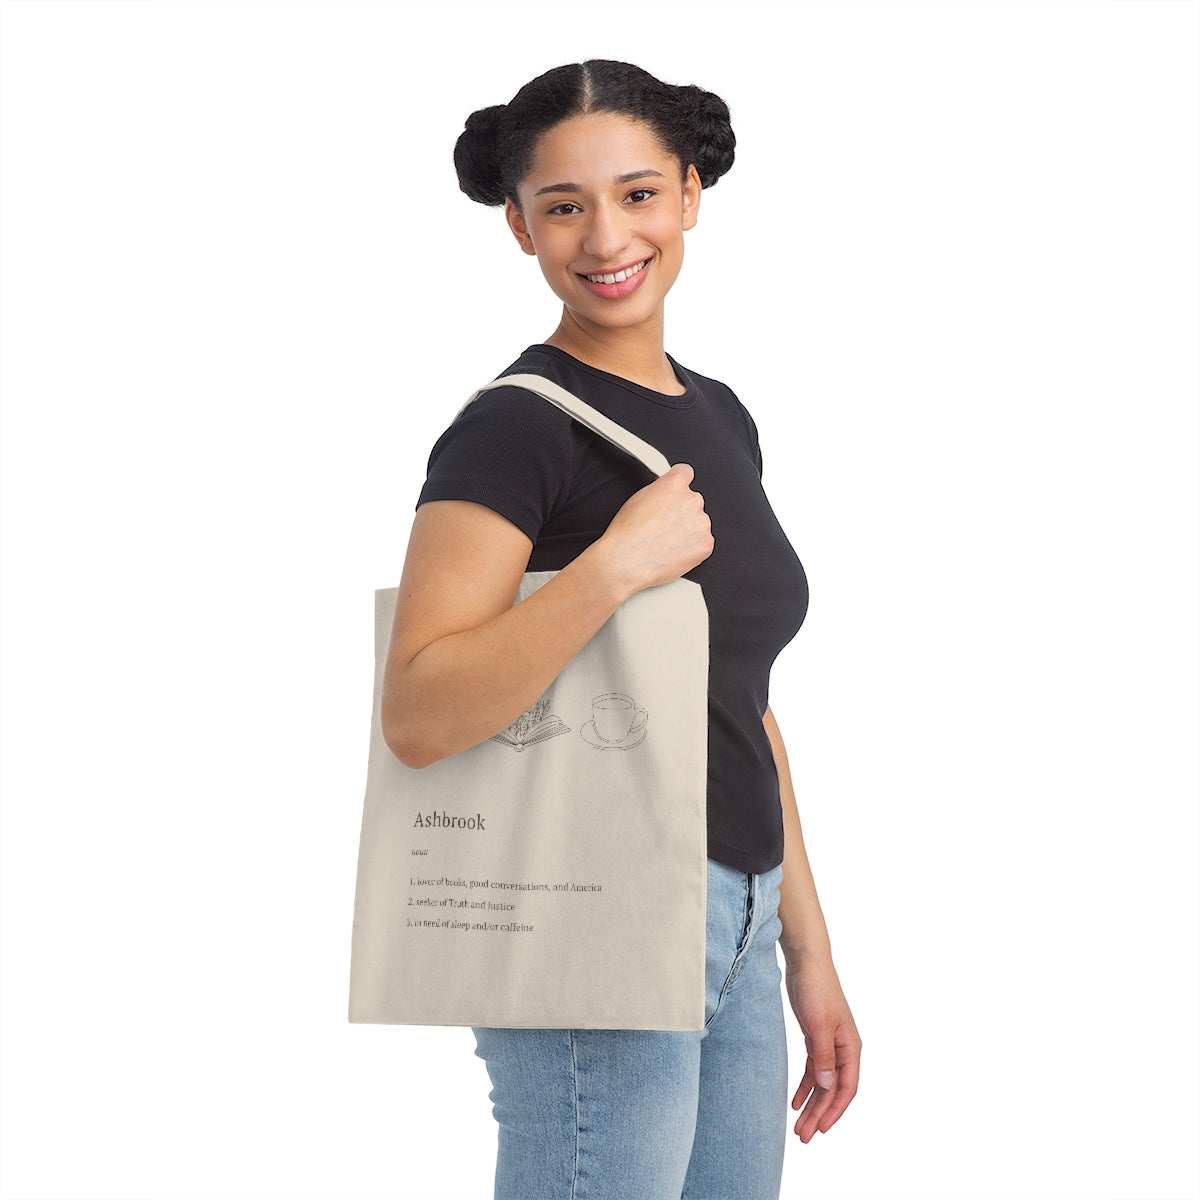 Canvas Tote Bag with Ashbrook Definition